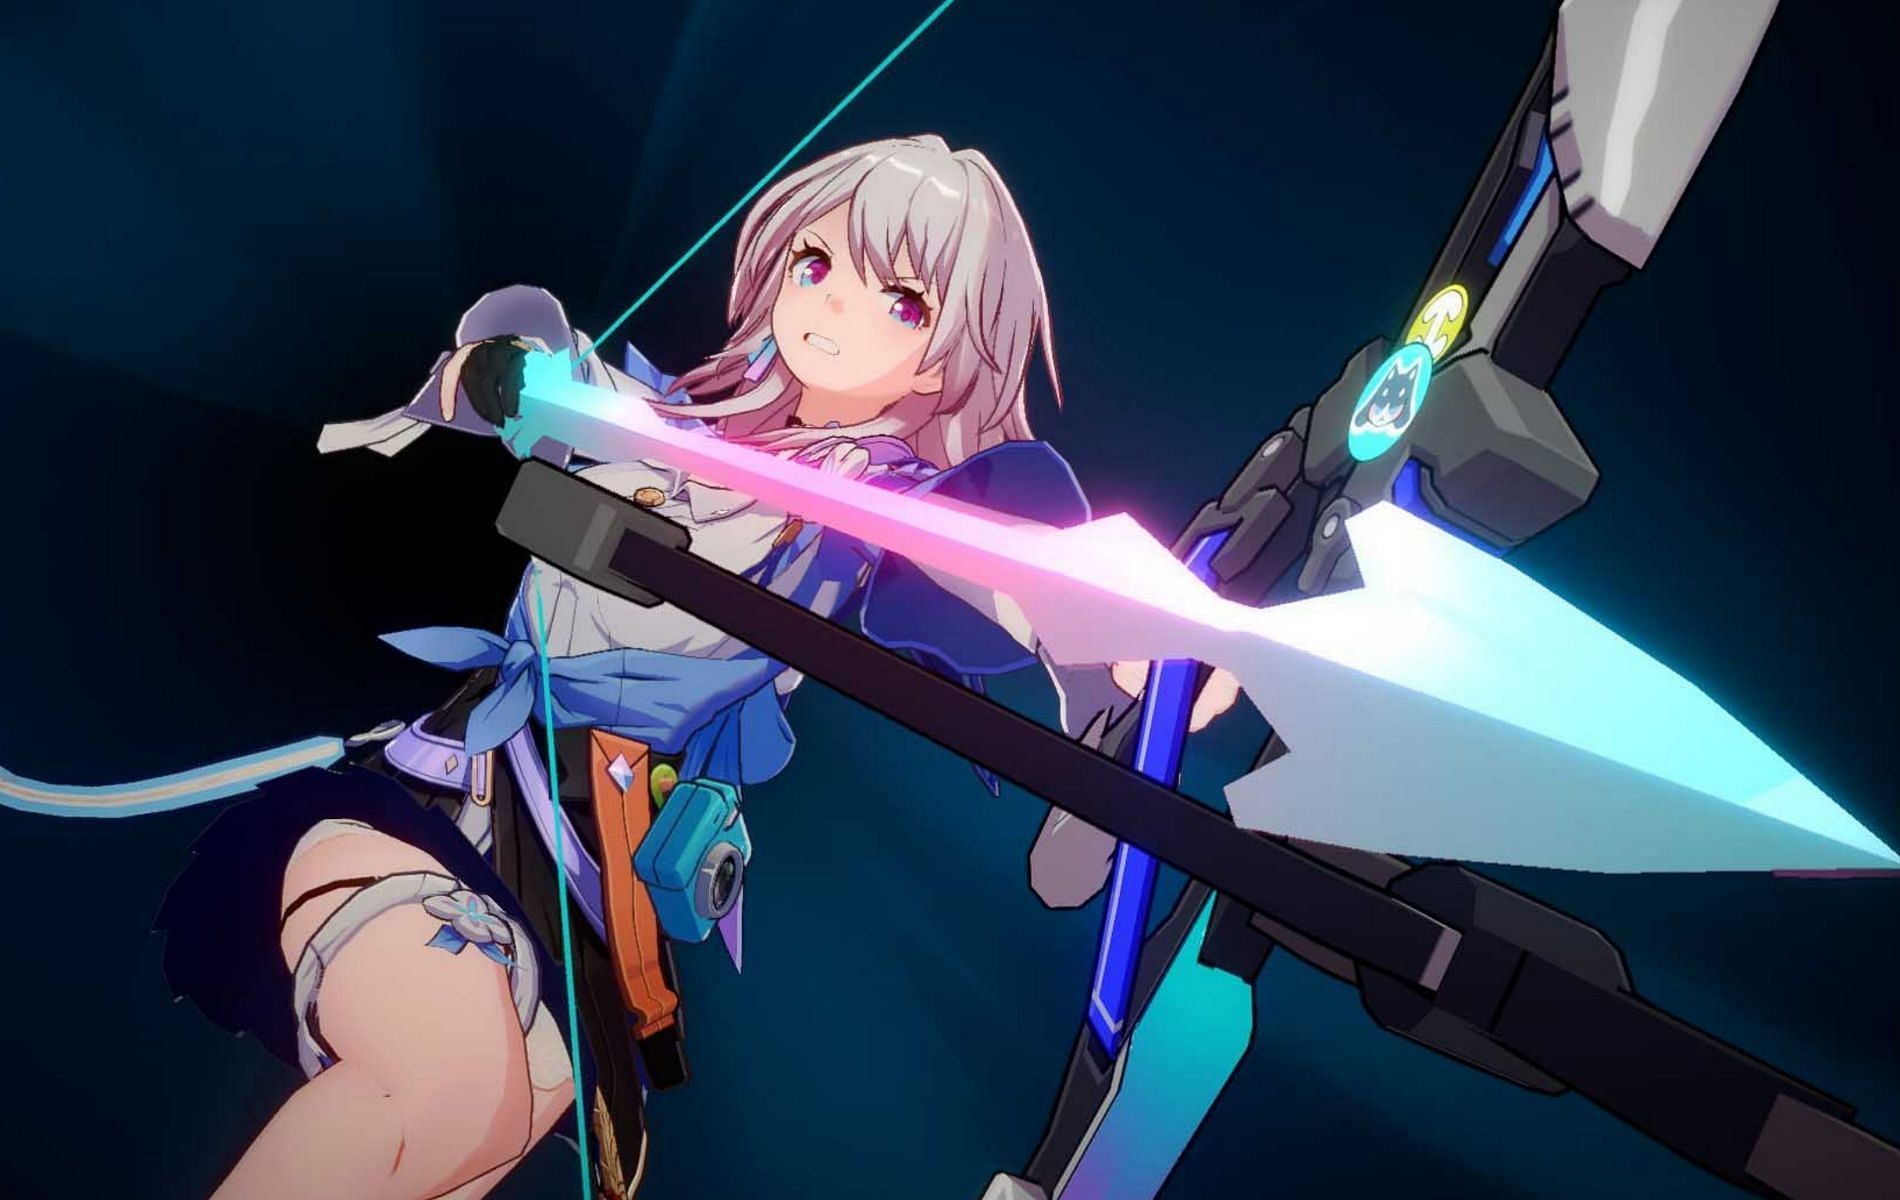 Honkai Star Rail: Solution of Problems that most Players are facing